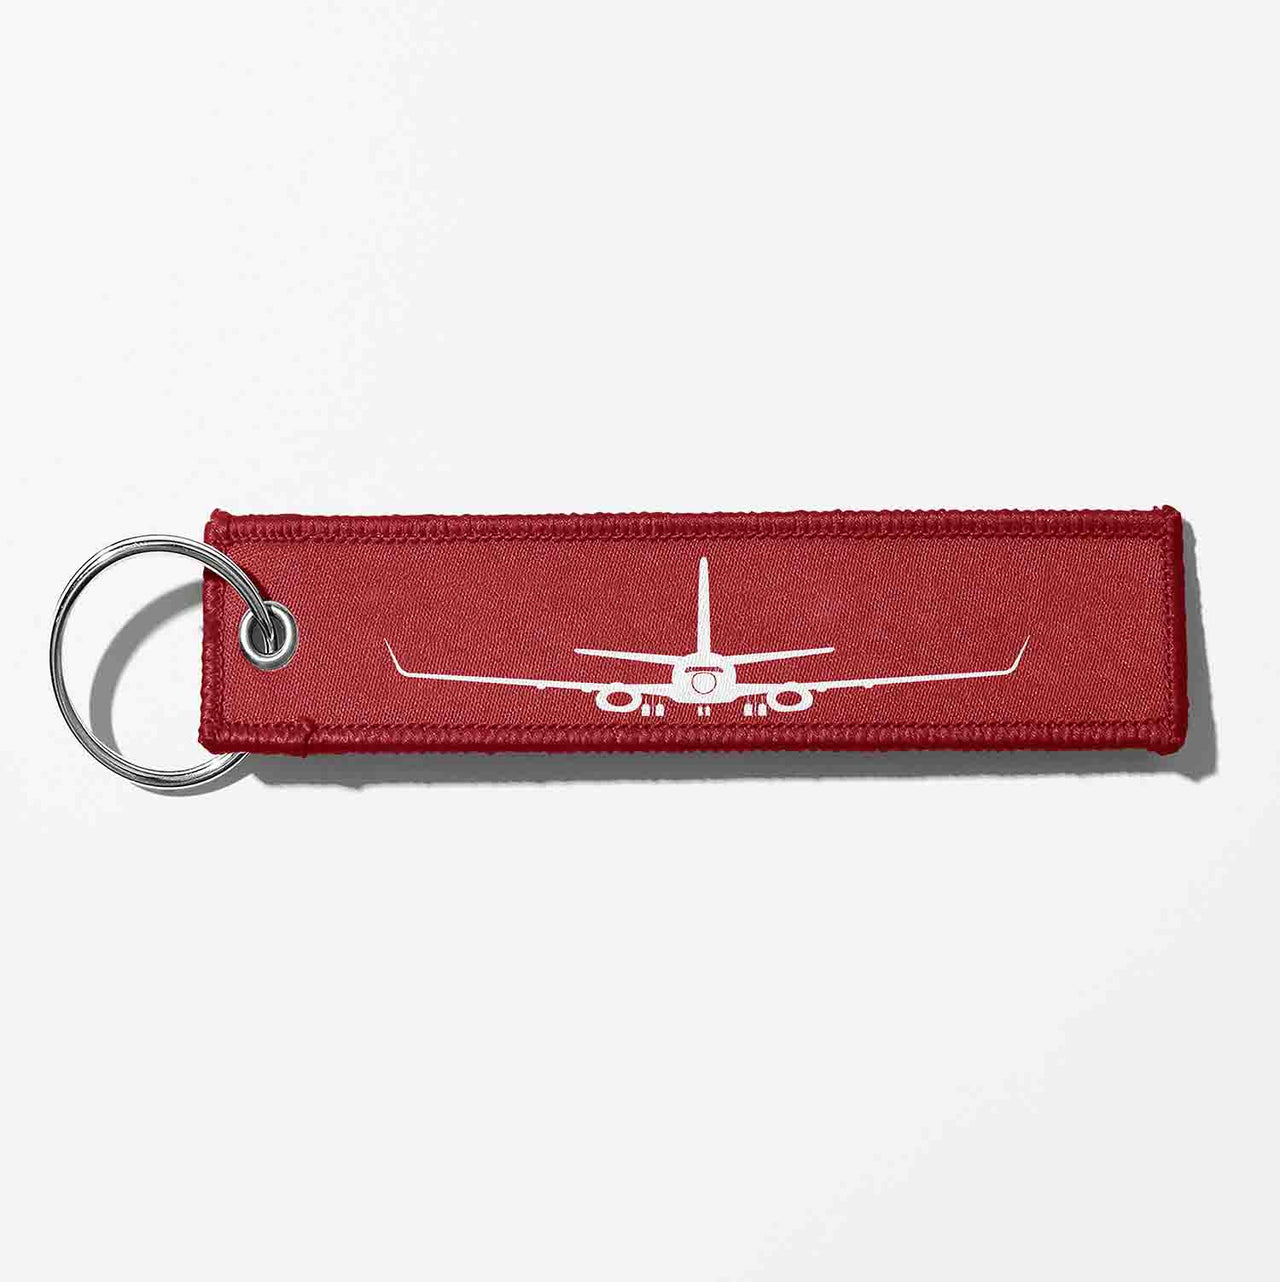 Boeing 737-800 Silhouette Designed Key Chains